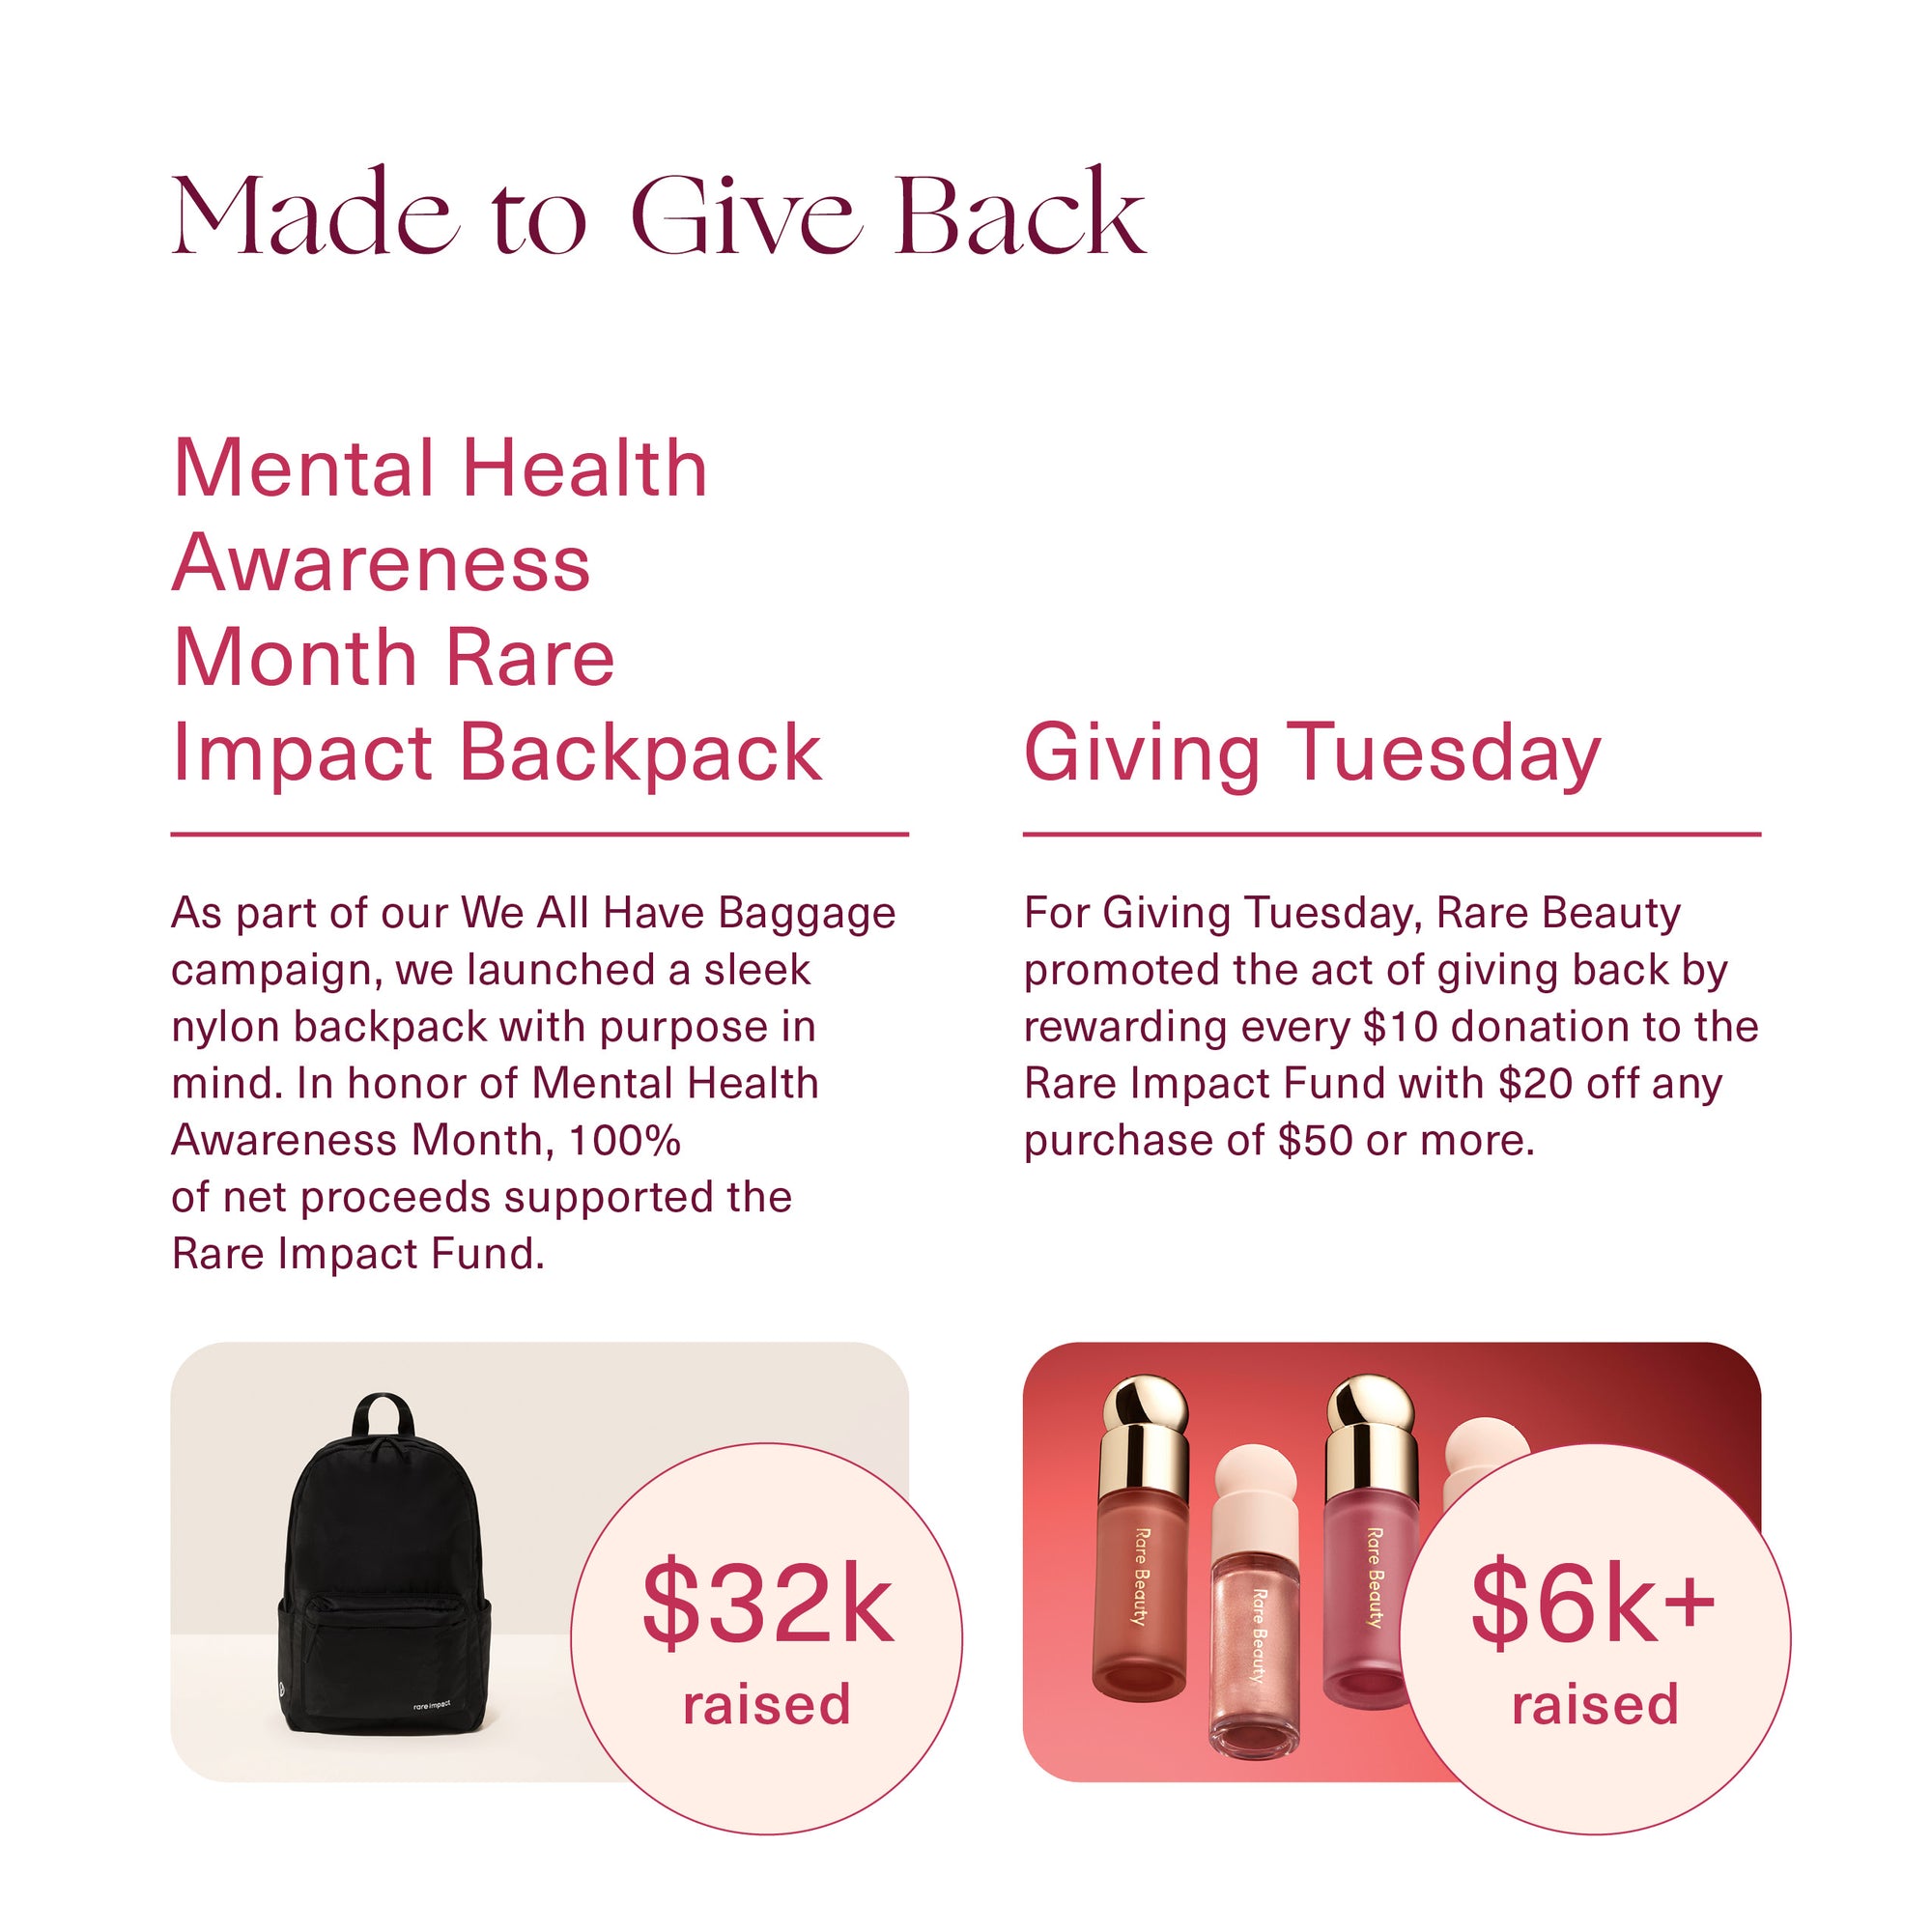 Made to Give Back image showing $32k raised in Impact Backpack and $6k raised in Giving Tuesday